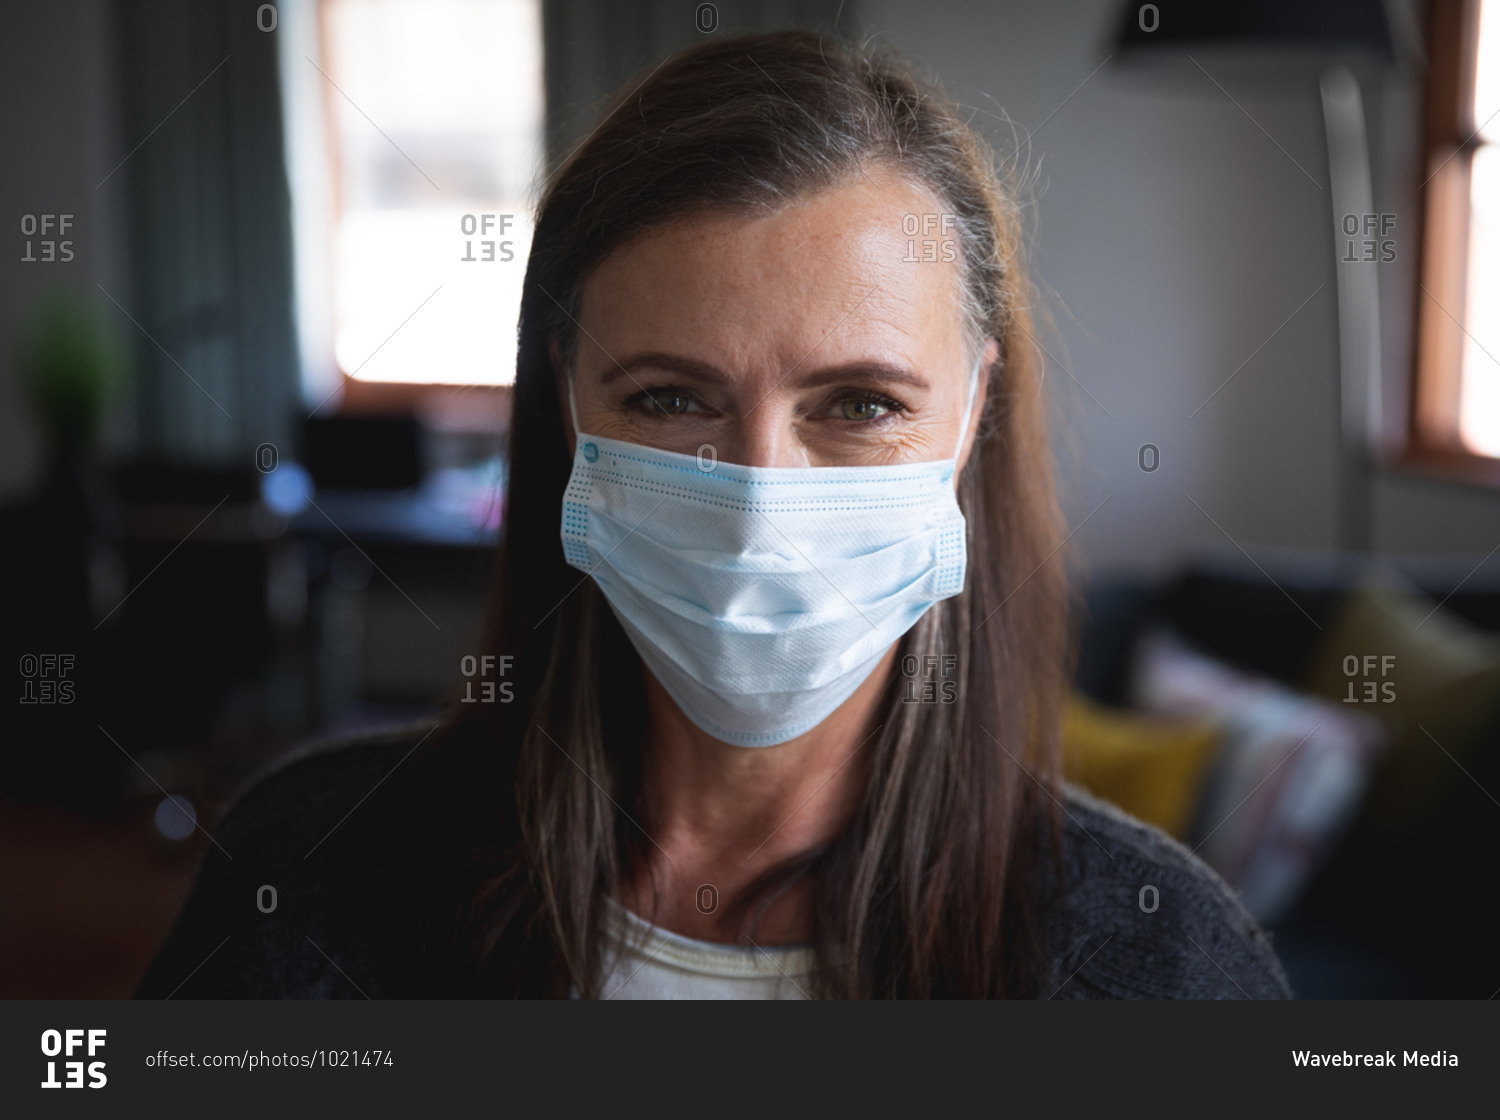 Portrait of Caucasian woman enjoying time at home, social distancing and self isolation in quarantine lockdown, wearing face mask protecting from Covid 19 coronavirus infection, looking at camera.